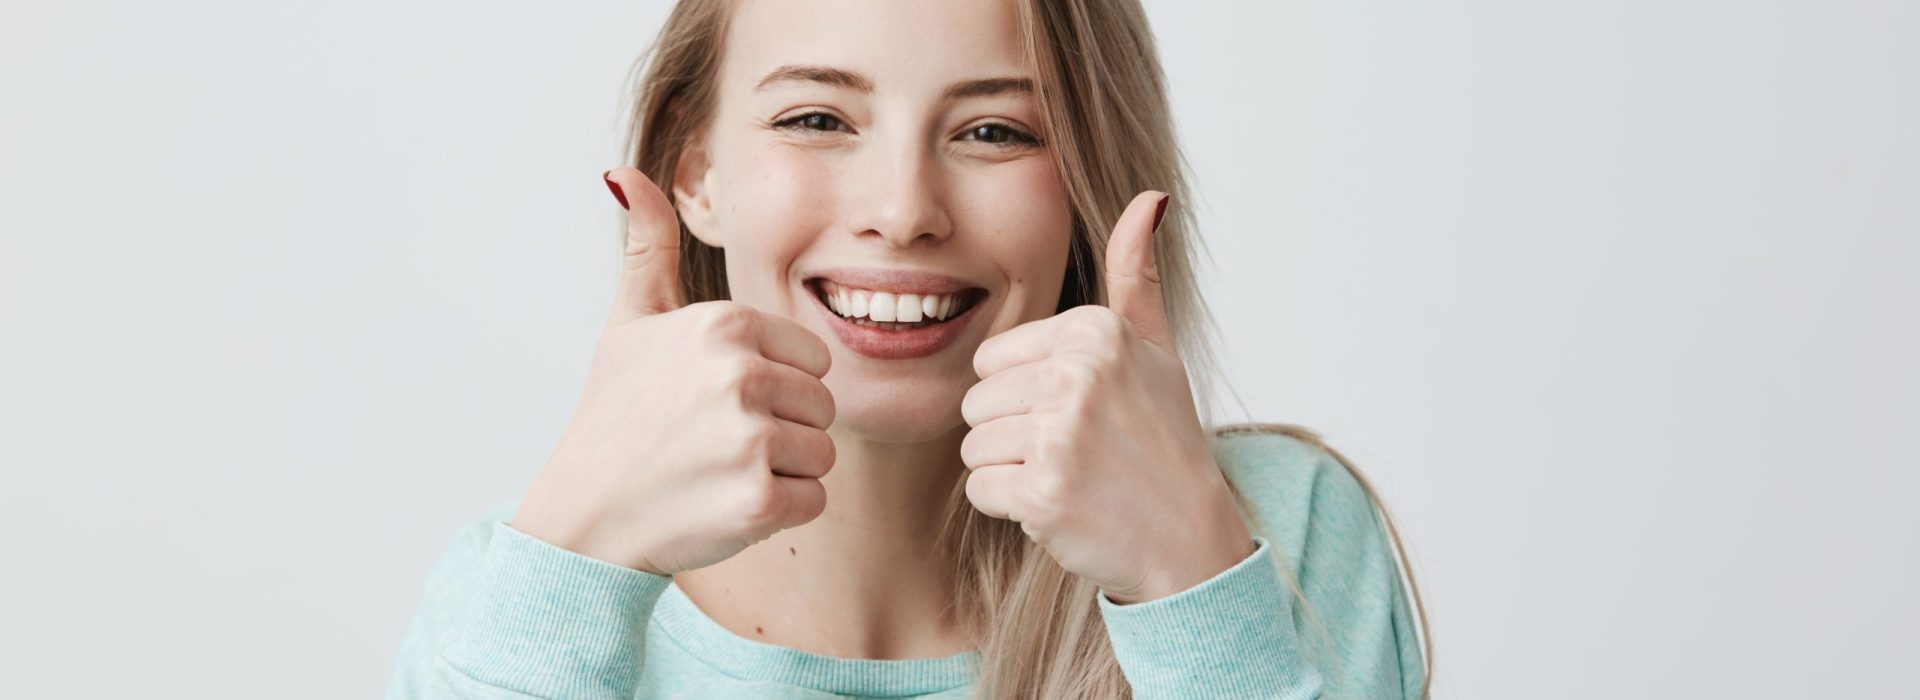 Portrait of positive blonde female student or customer with broad smile, looking at the camera with happy expression, showing thumbs-up with both hands, achieving goals. Body language